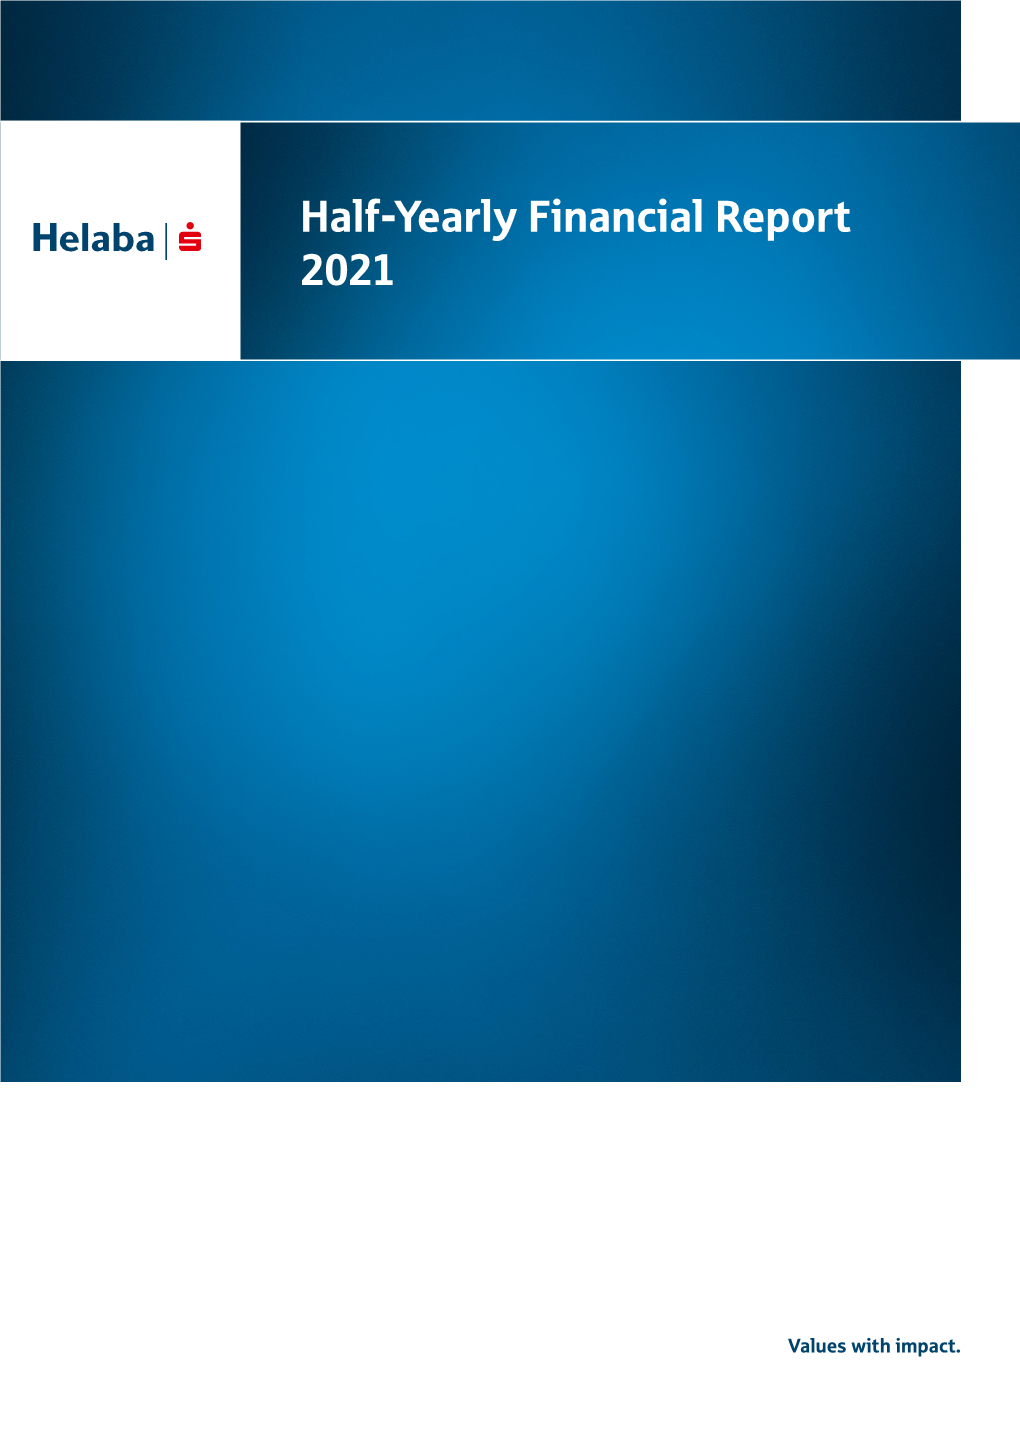 Half-Yearly Financial Report 2021 2021 Half-Yearly Financialreport Values Impact